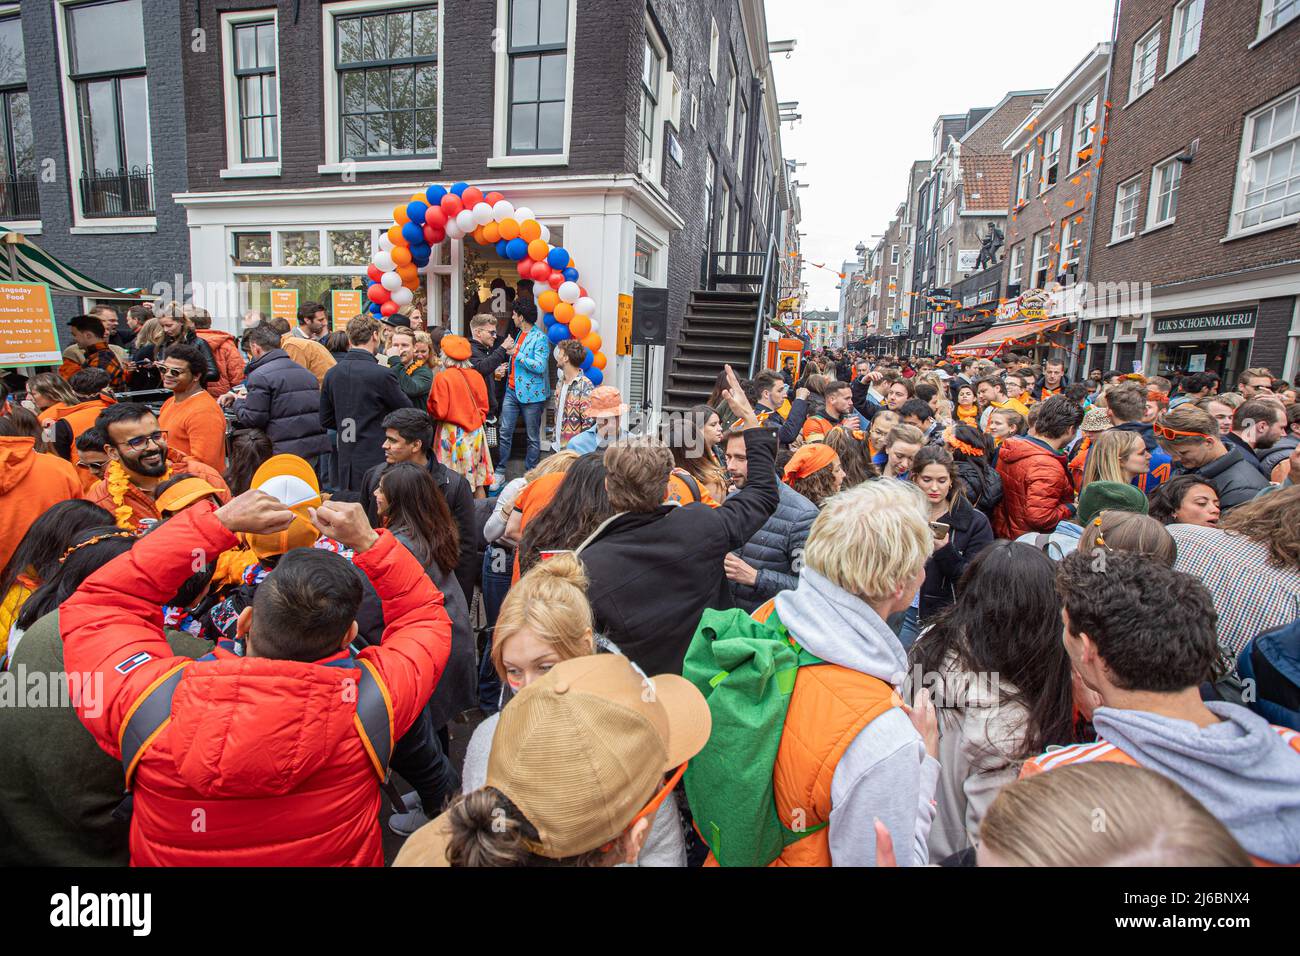 Crowds of people seen on the streets of Amsterdam during the King's Day celebration. King's Day known as Koningsdag is an orange filled celebration for the king's birthday, a national holiday full of events across the country. Thousands of local revellers and tourists visited Amsterdam to celebrate and party around the canals while wearing orange clothes and the boats doing a parade in the water canals. (Photo by Nik Oiko / SOPA Images/Sipa USA) Stock Photo